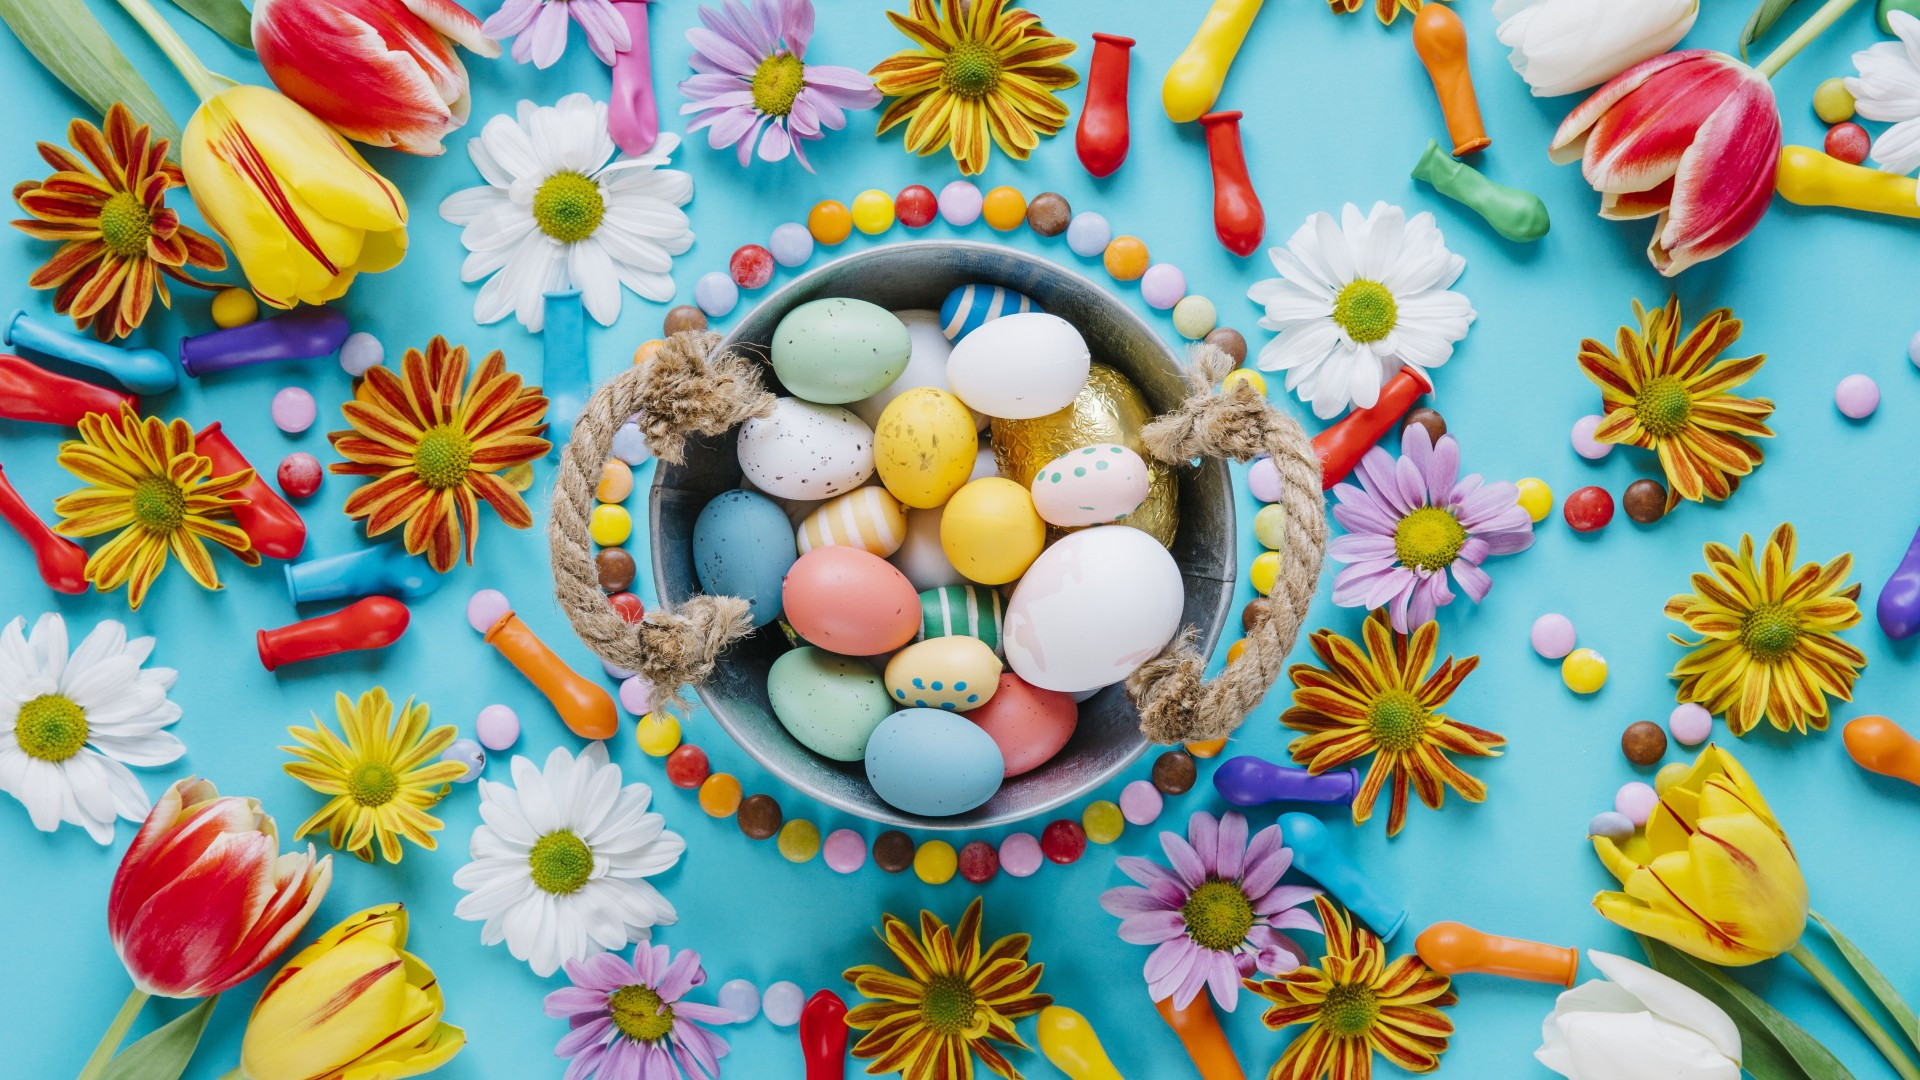 Download 1920x1080 Easter Eggs, Flowers, Sweets Wallpaper for Widescreen